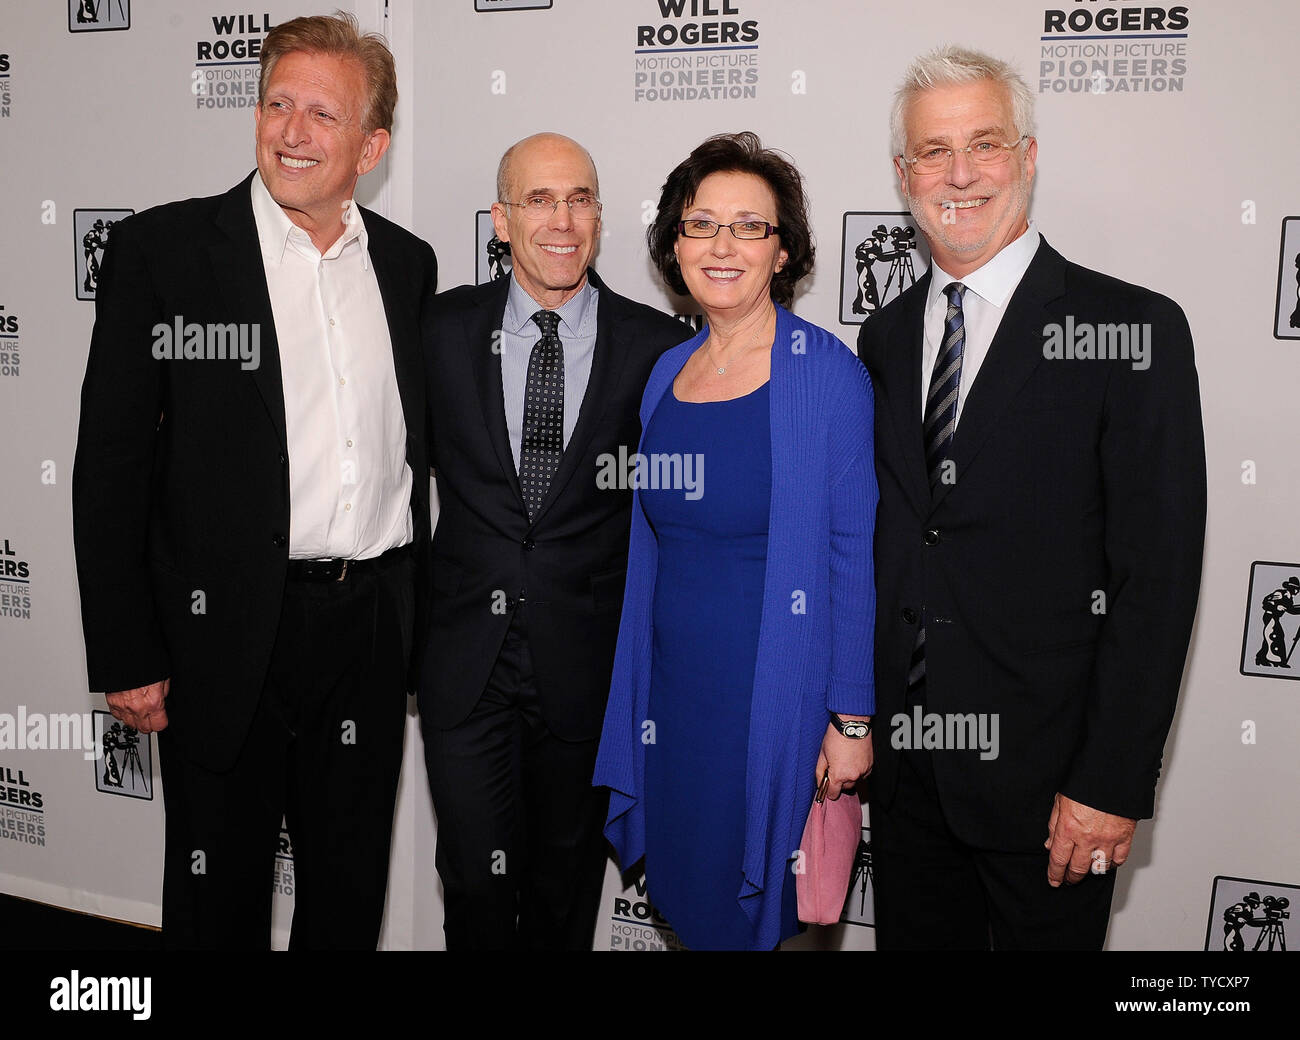 (L-R) Producer Joe Roth, DreamWorks Animation CEO Jeffrey Katzenberg, Madeline Sherak and Lionsgate Motion Picture Group Co-Chairman Rob Friedman arrive at the 2014 Will Rogers ?Pioneer of the Year? Dinner Honoring Tom Sherak at Caesars Palace during CinemaCon, the official convention of the National Association of Theatre Owners, in Las Vegas, Nevada on March 26, 2014. UPI/David Becker Stock Photo